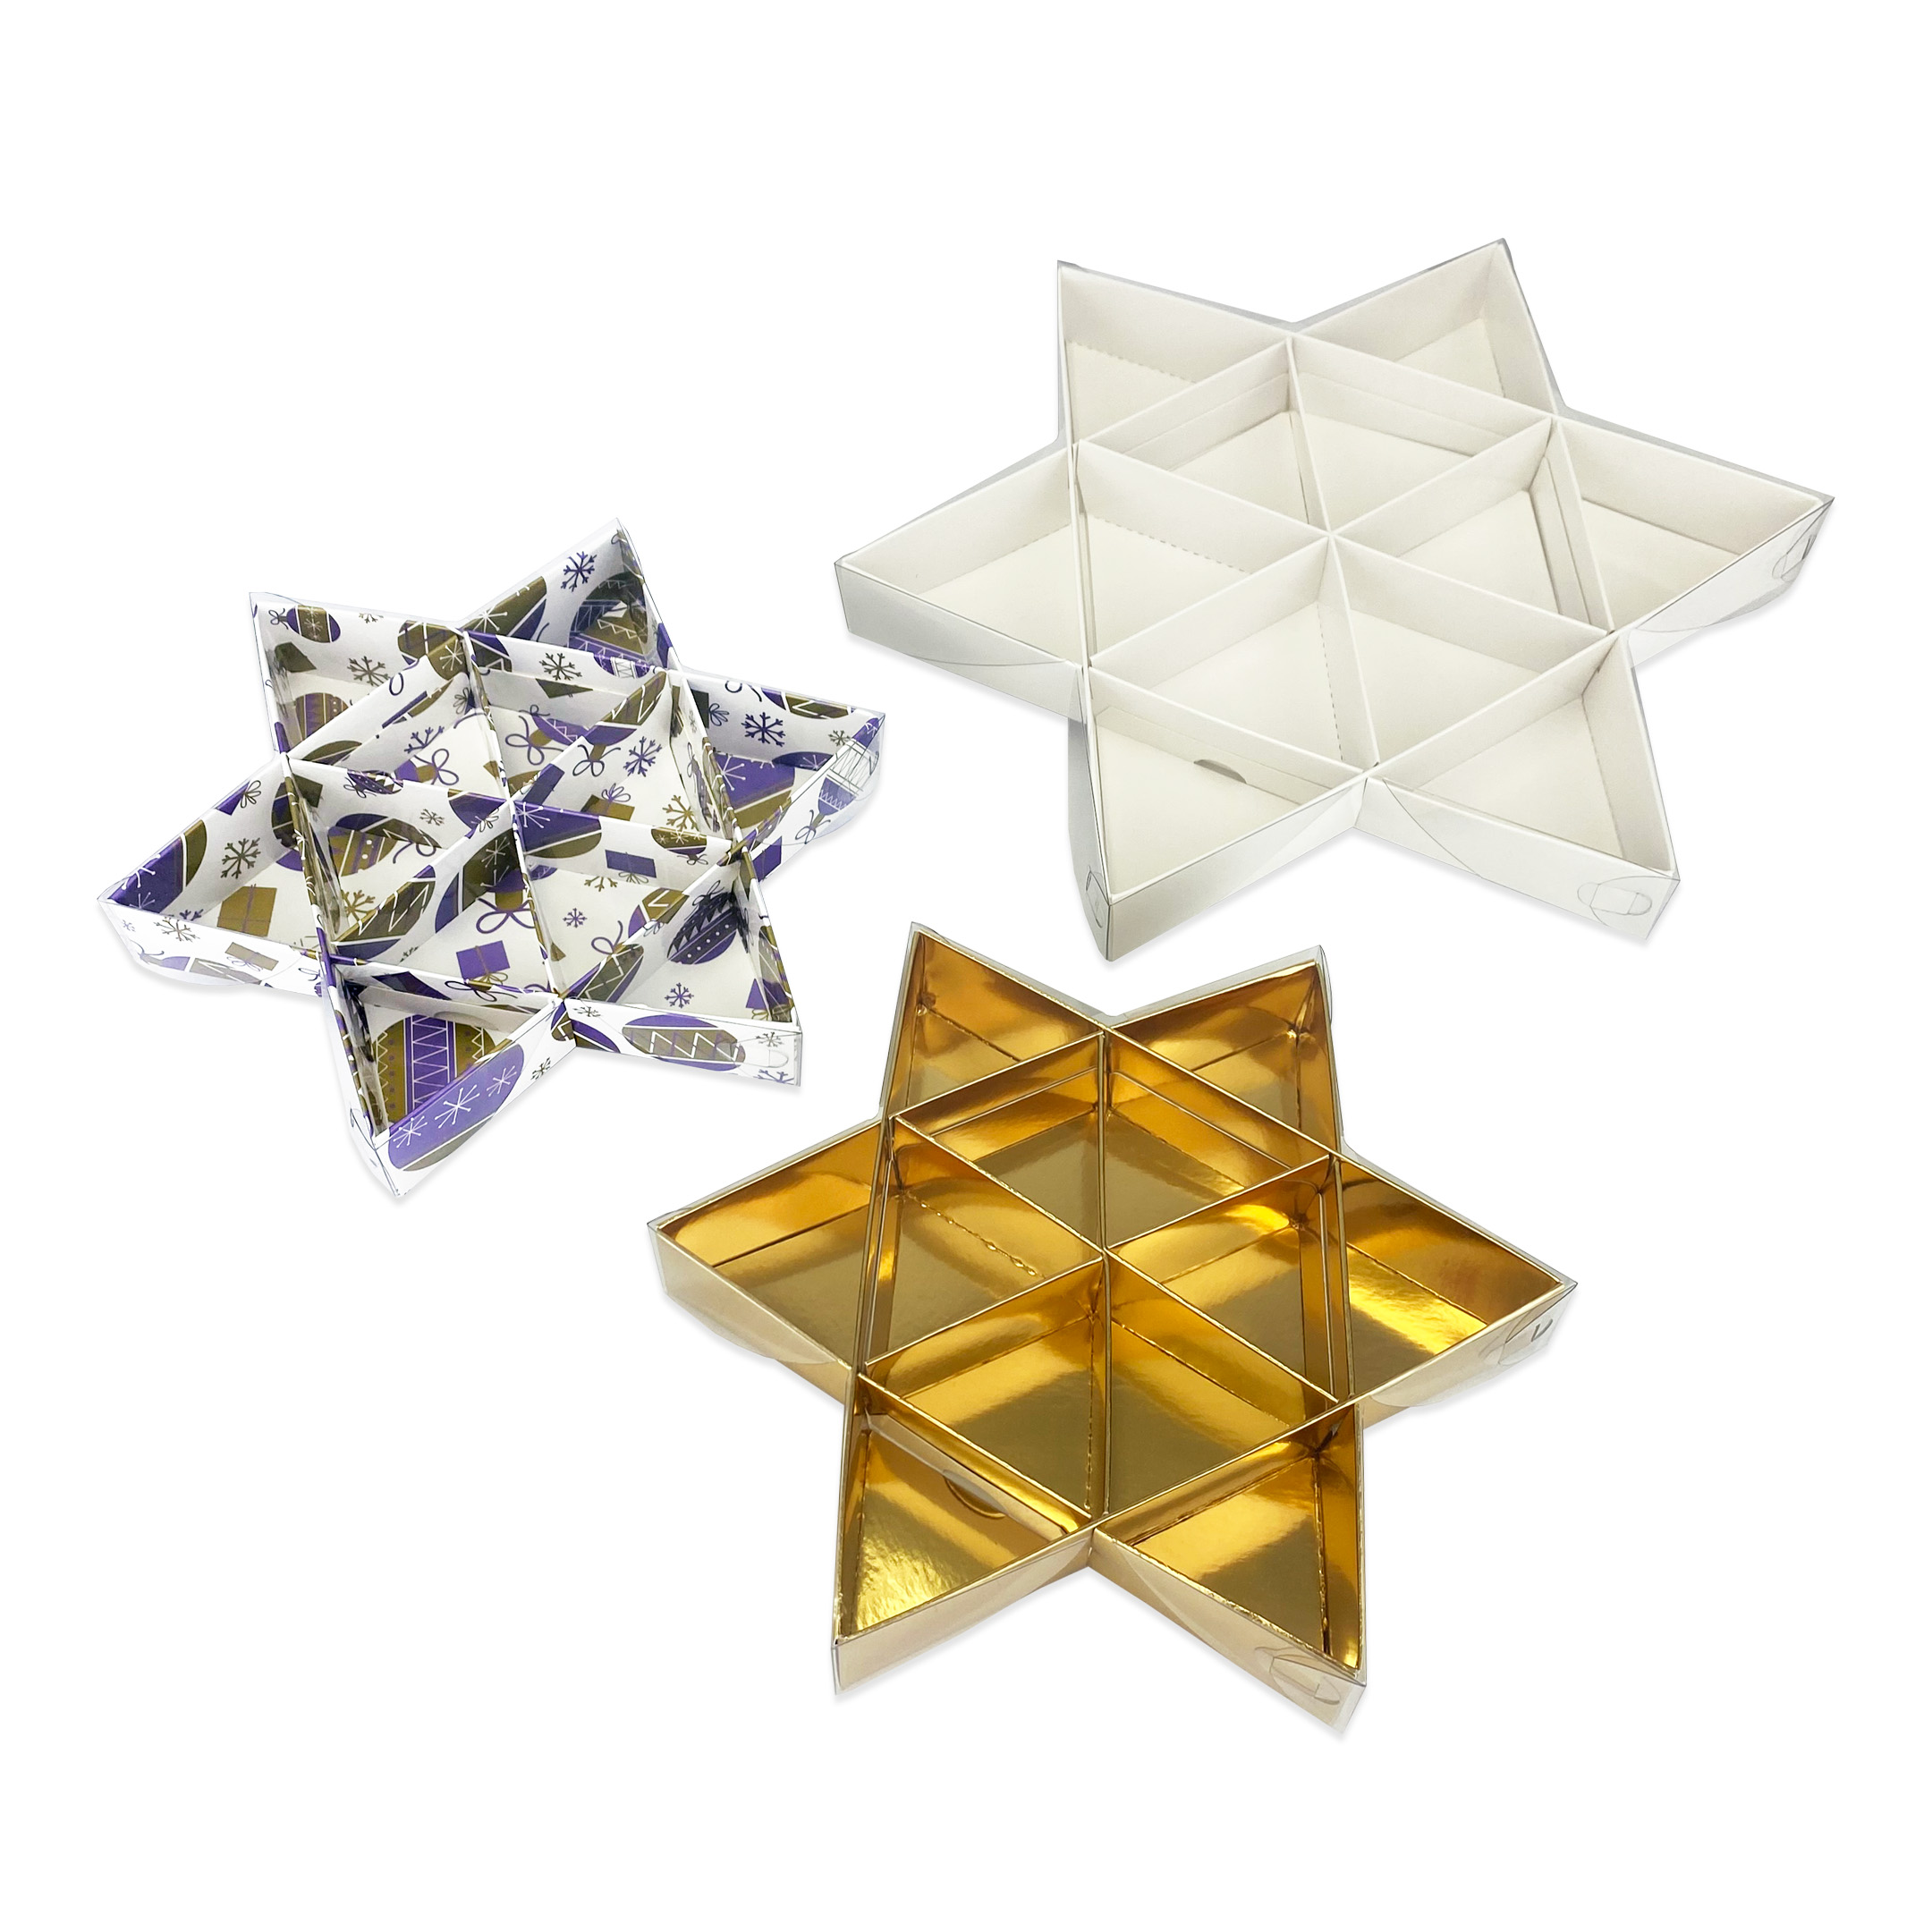 Six-point star pre-assembled base, divider and clear lid gift box in bright gold, white & purple bauble pattern